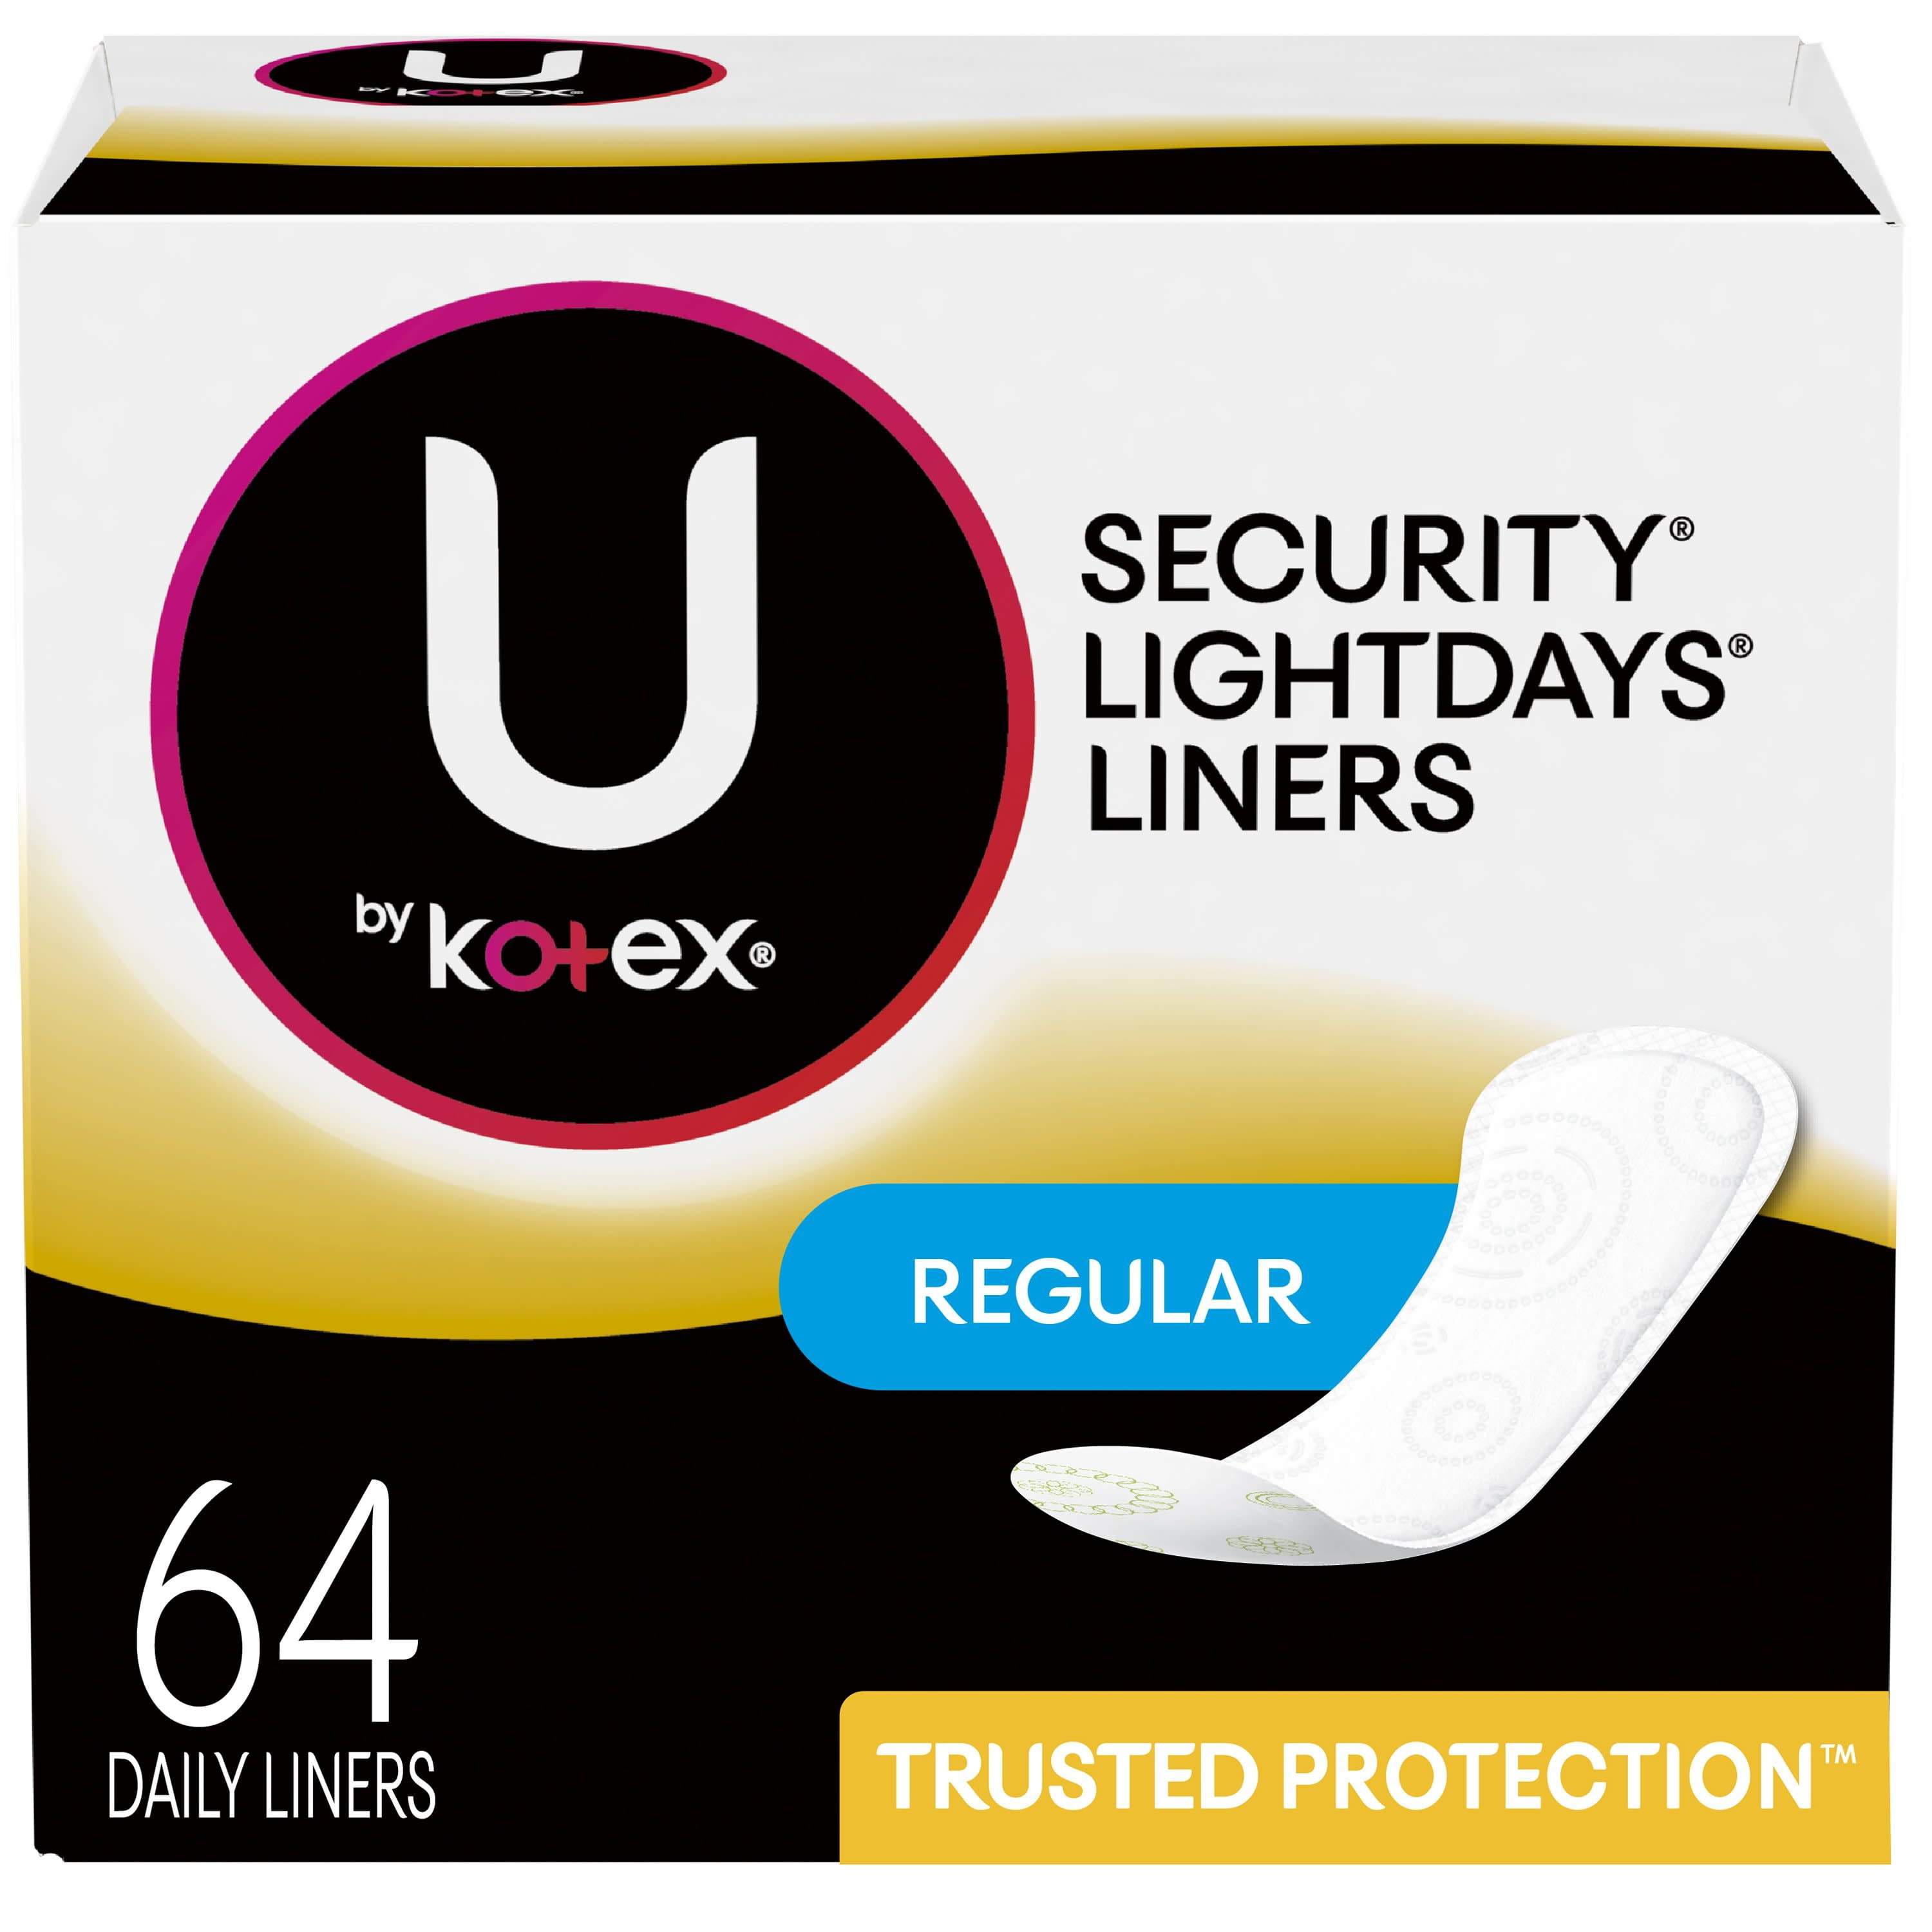 320 Count Total Regular 40 Count U by Kotex Lightdays PLUS Liners Fragrance-Free Pack of 8